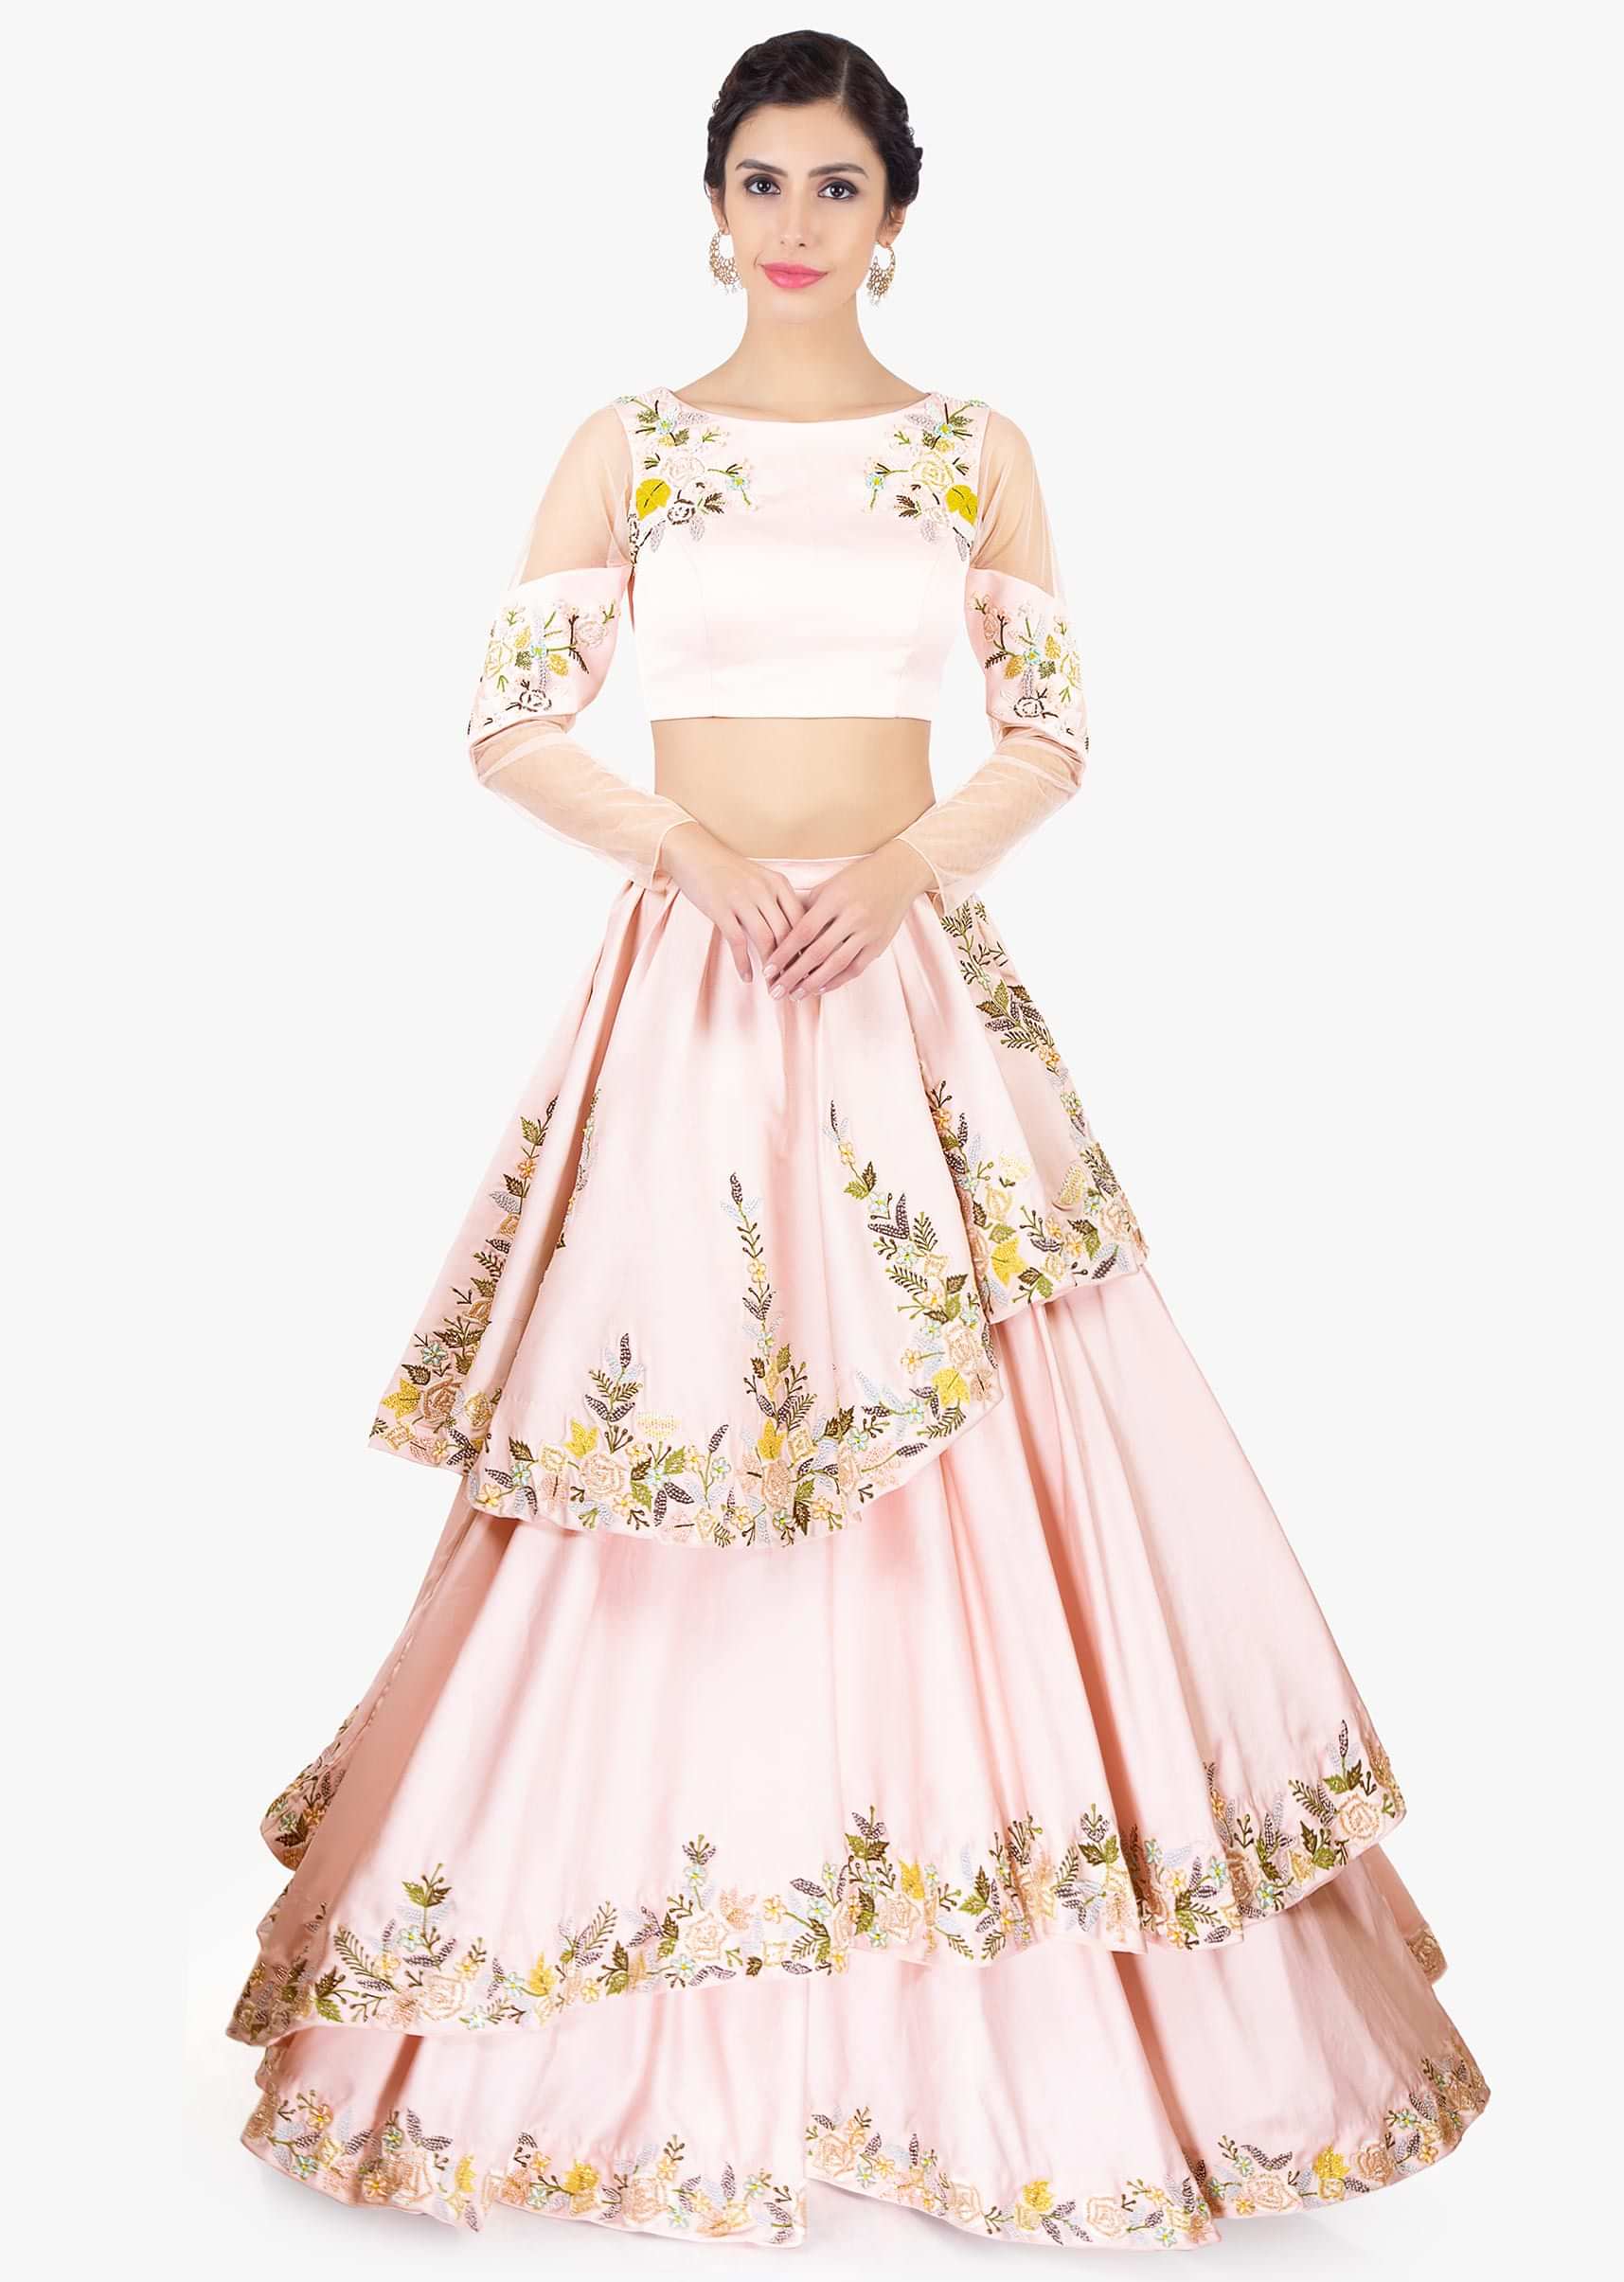 Powder pink multi layered crepe skirt paired with floral embroidered crop top